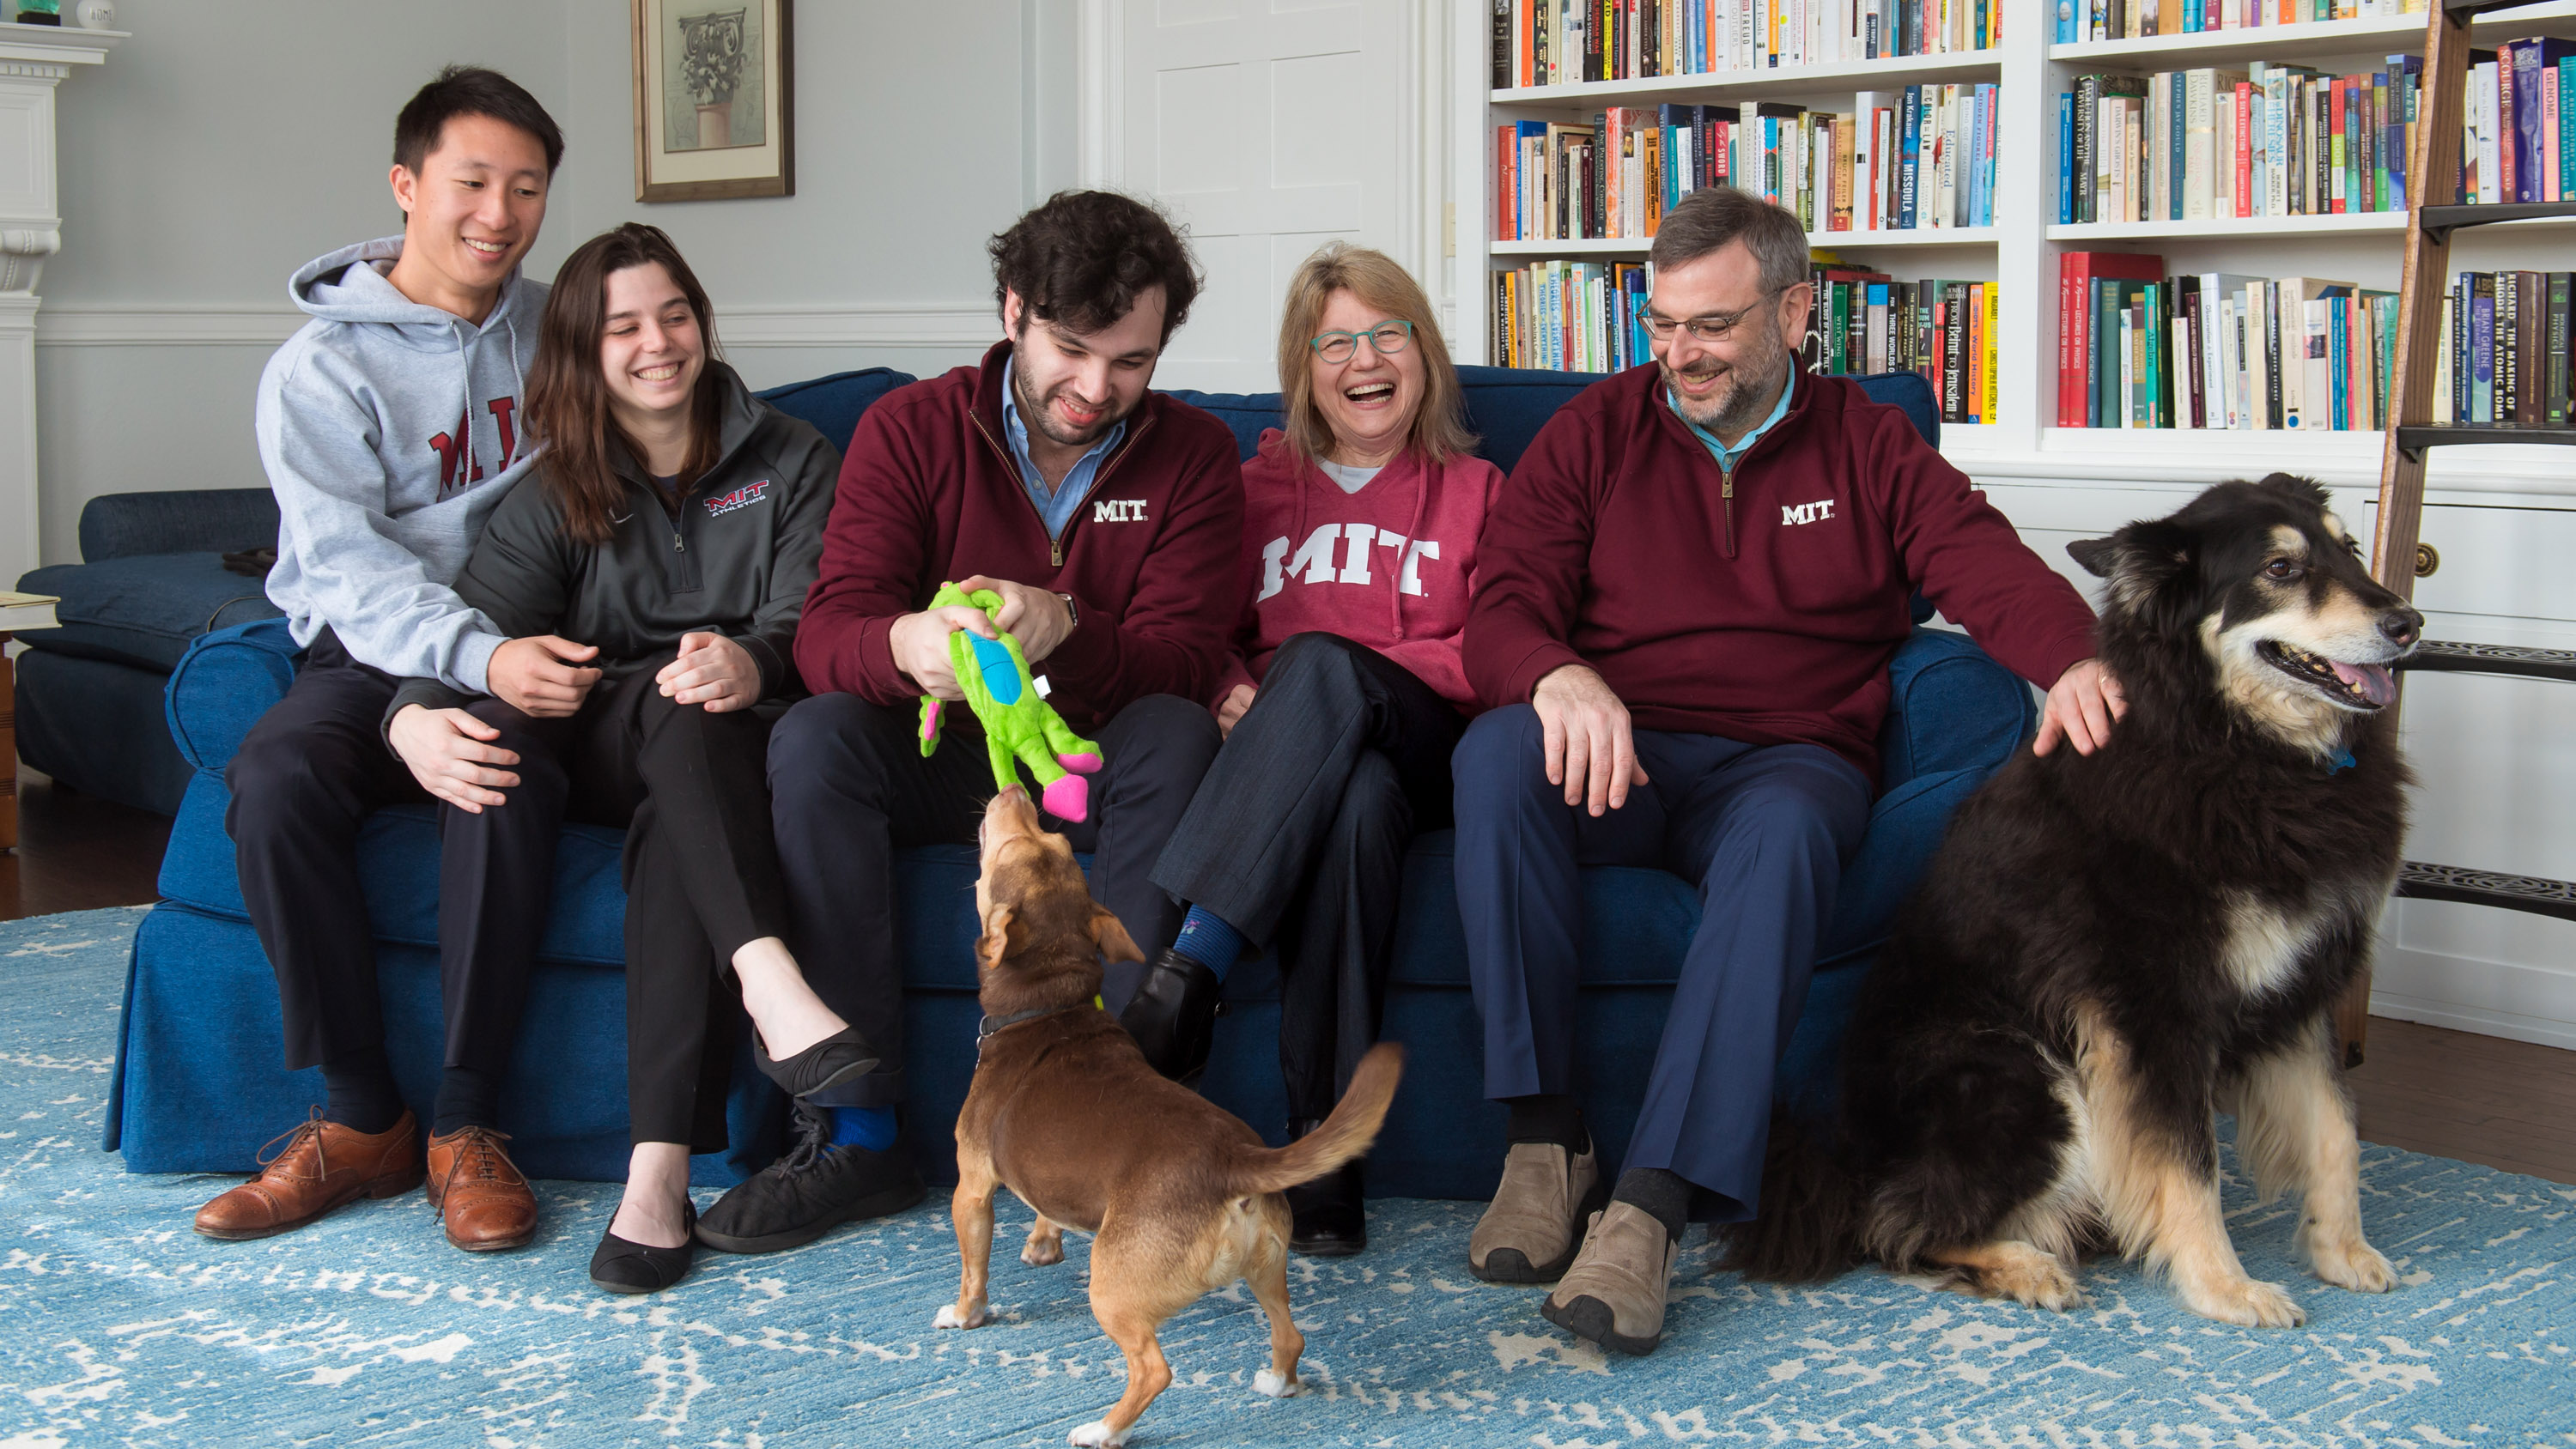 Sally Kornbluth on a couch with her family and two dogs